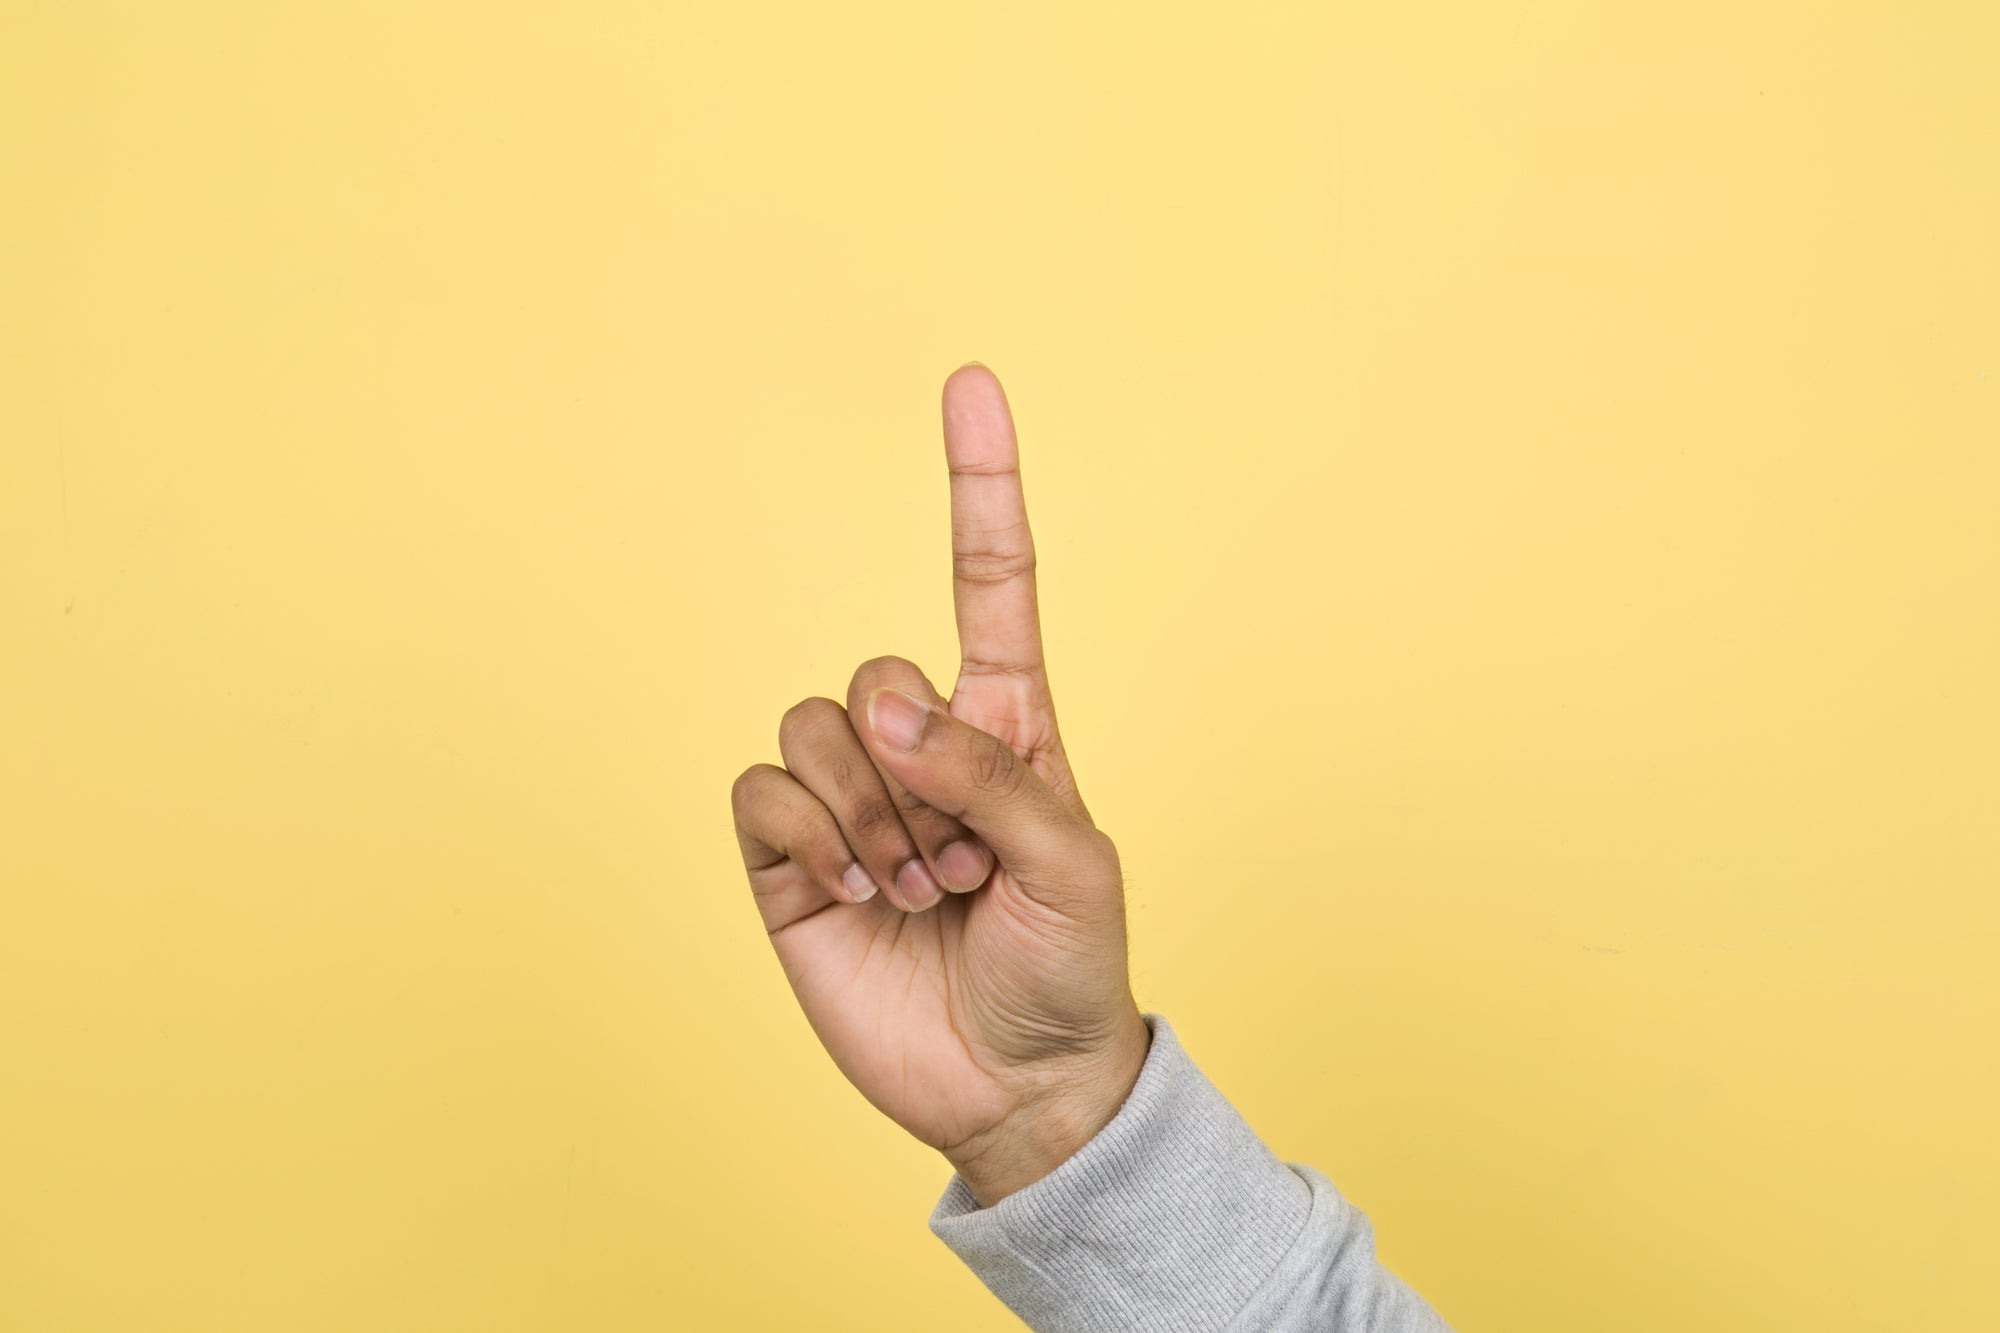 hand in fist with pointer finger pointing up against a yellow background